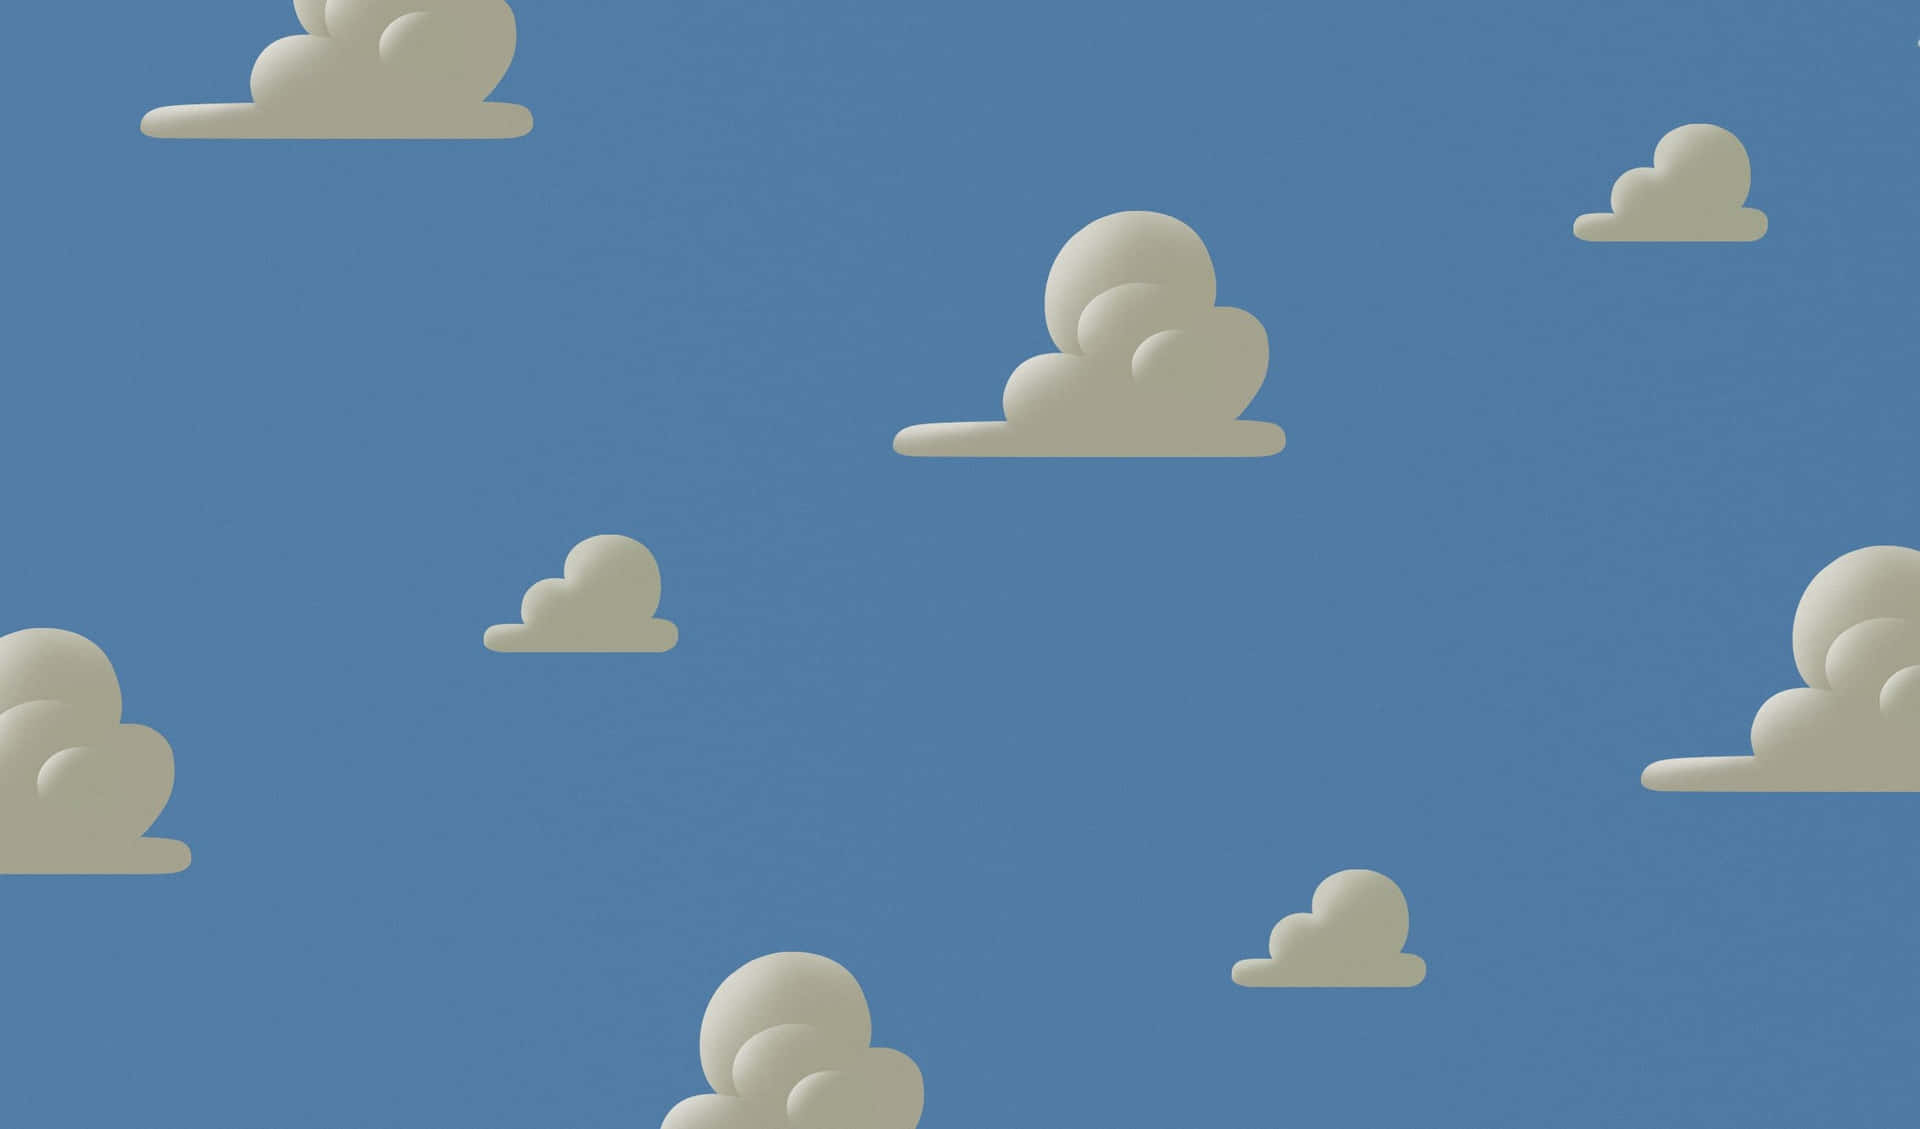 “Toy Story In the Cloud” Wallpaper